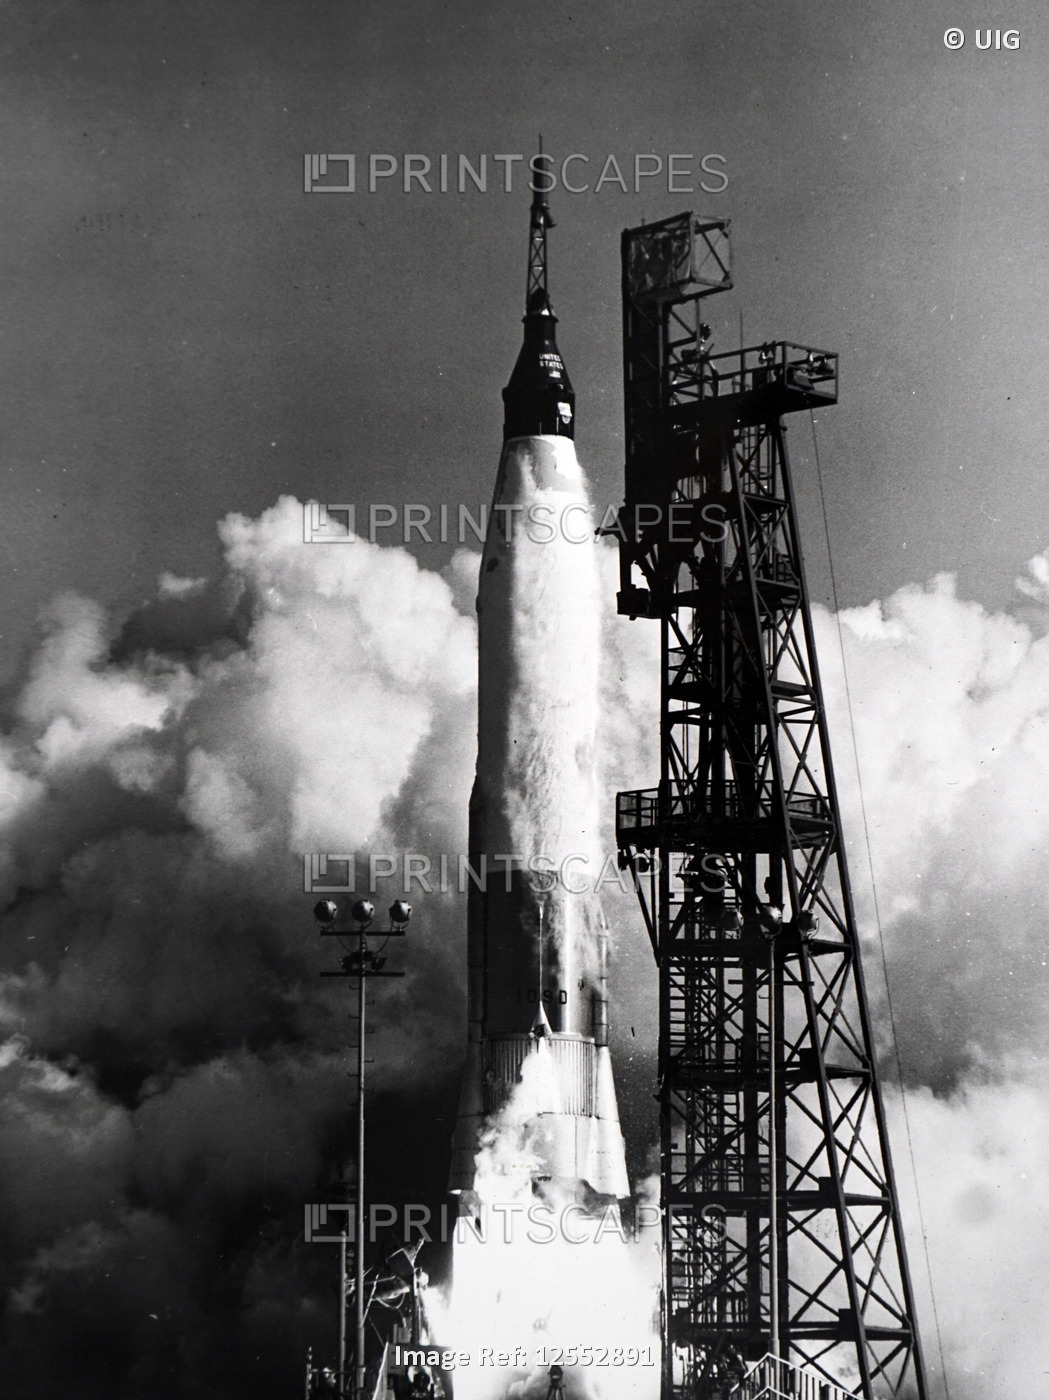 Photograph taken during the launch of Mercury-Atlas 8, 20th century